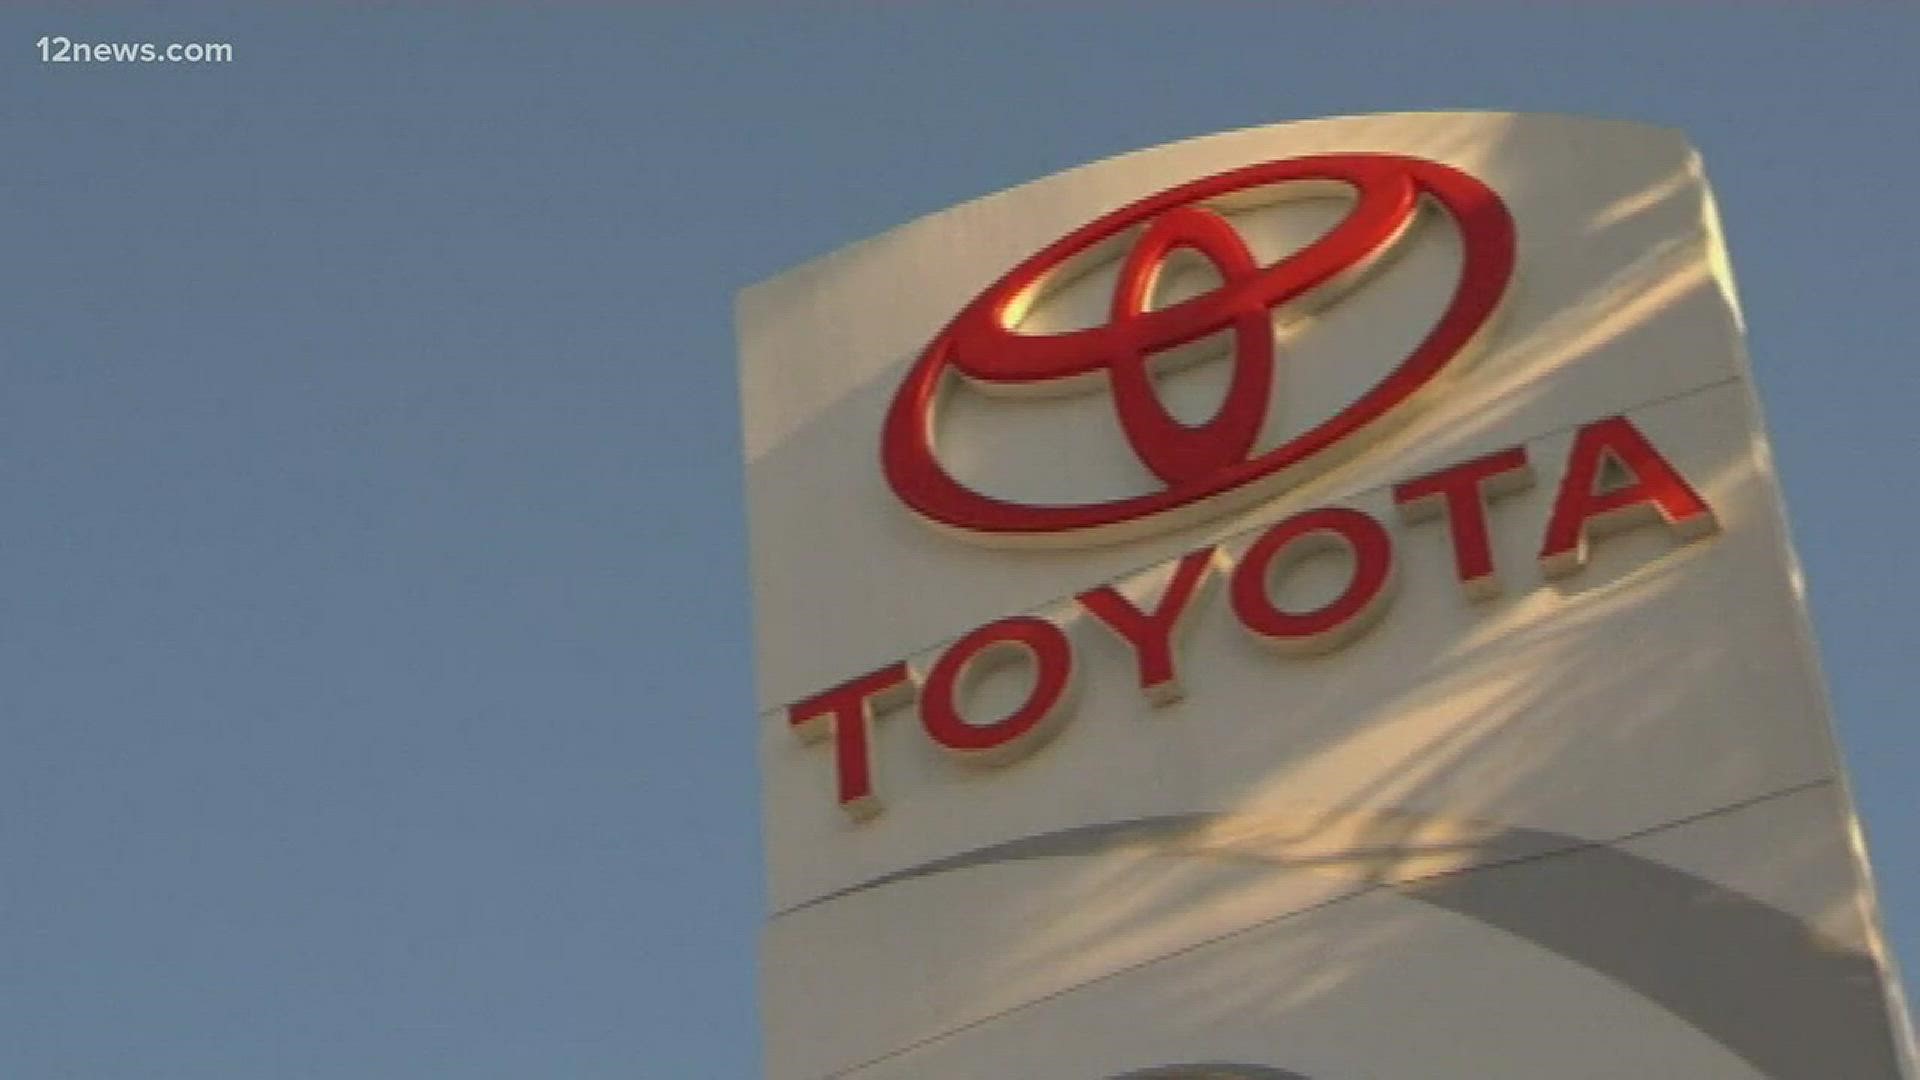 In consumer reports' ranking, Toyota won 4 of the 10 top honors.